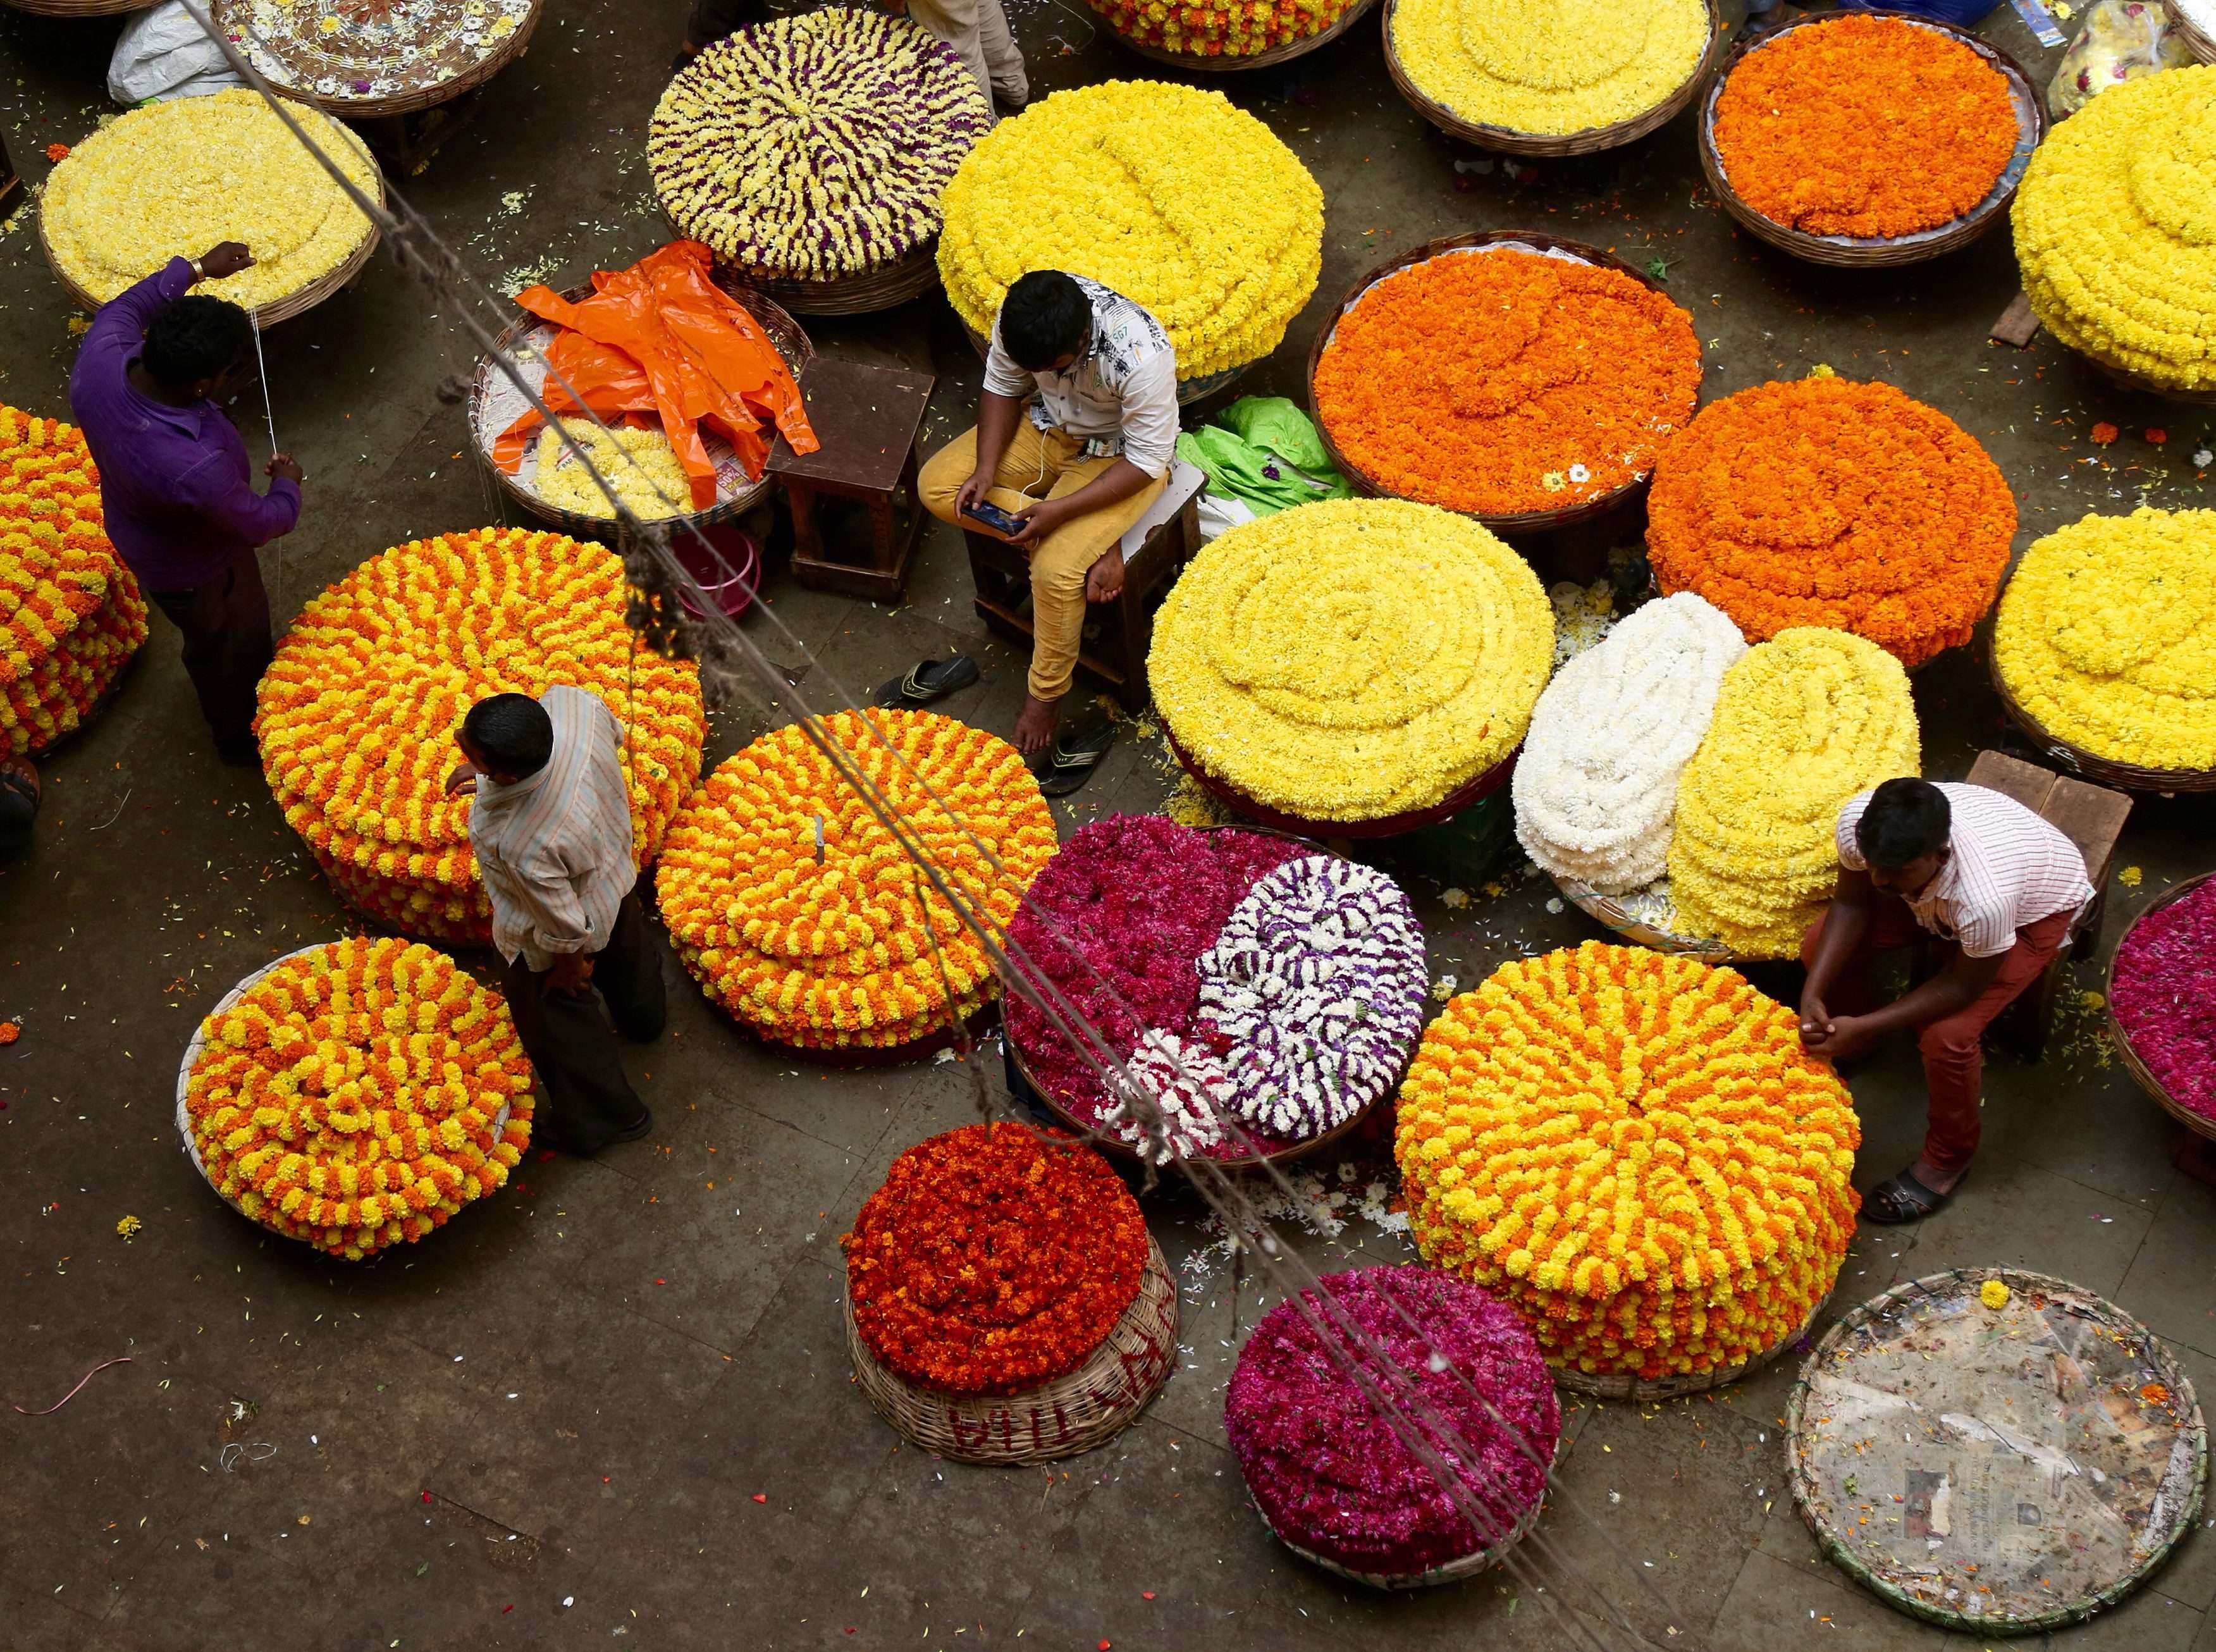 Indian flower vendors wait for customers at a market in Bangalore. Indian businesses have been hit hard by the lack of currency notes in the wake of the government’s decision to ban high denomination notes. Photo: EPA